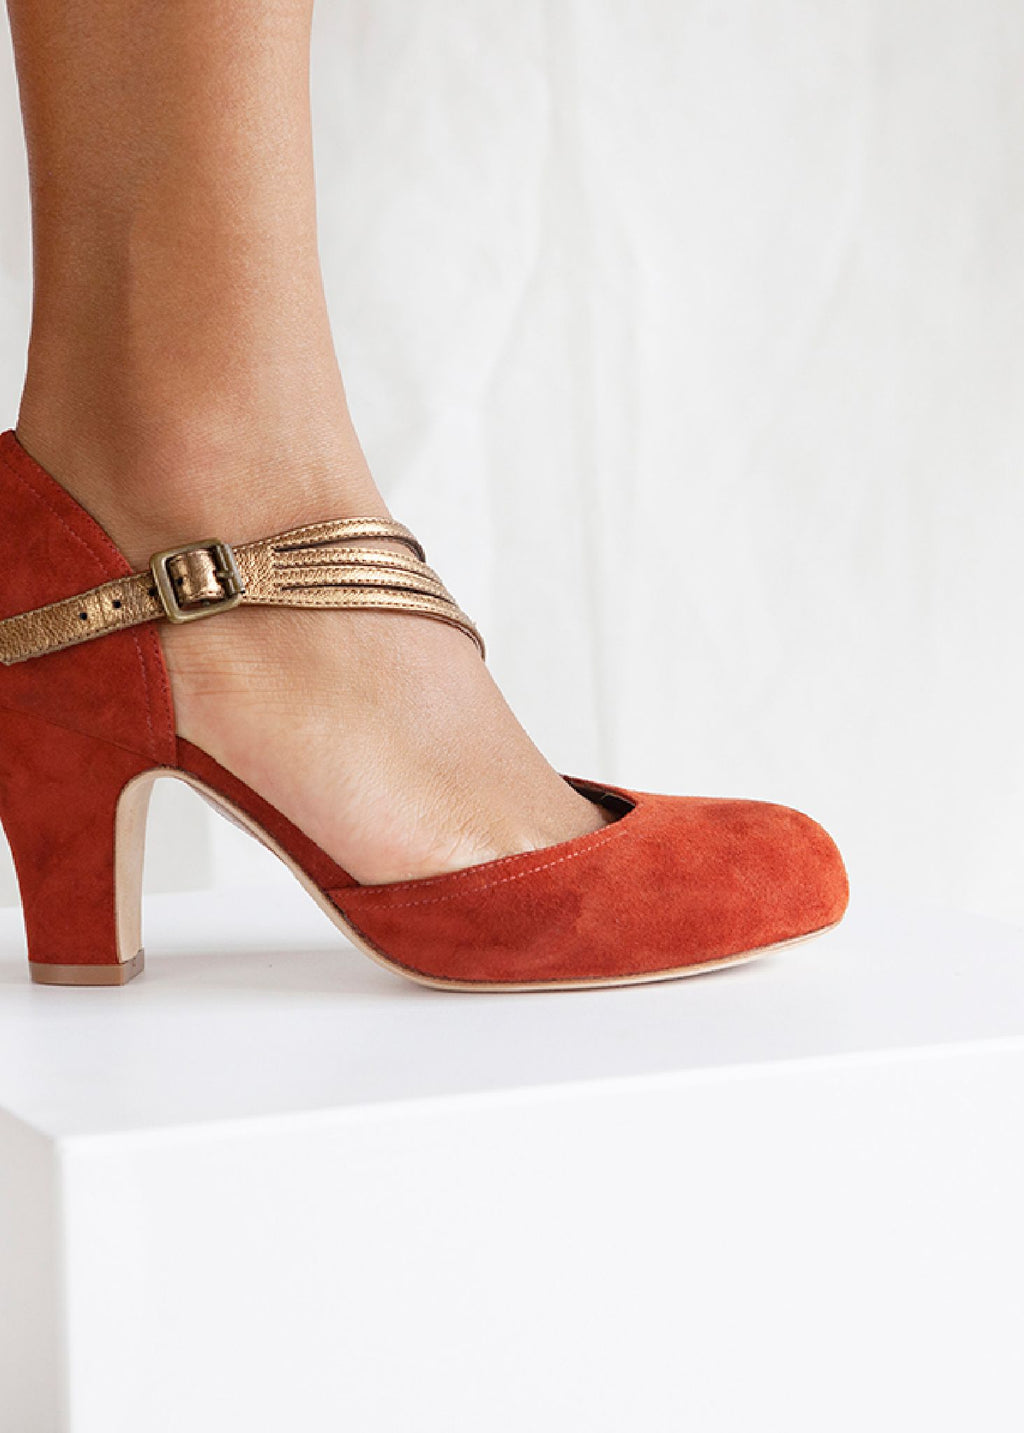 rust colored suede pumps